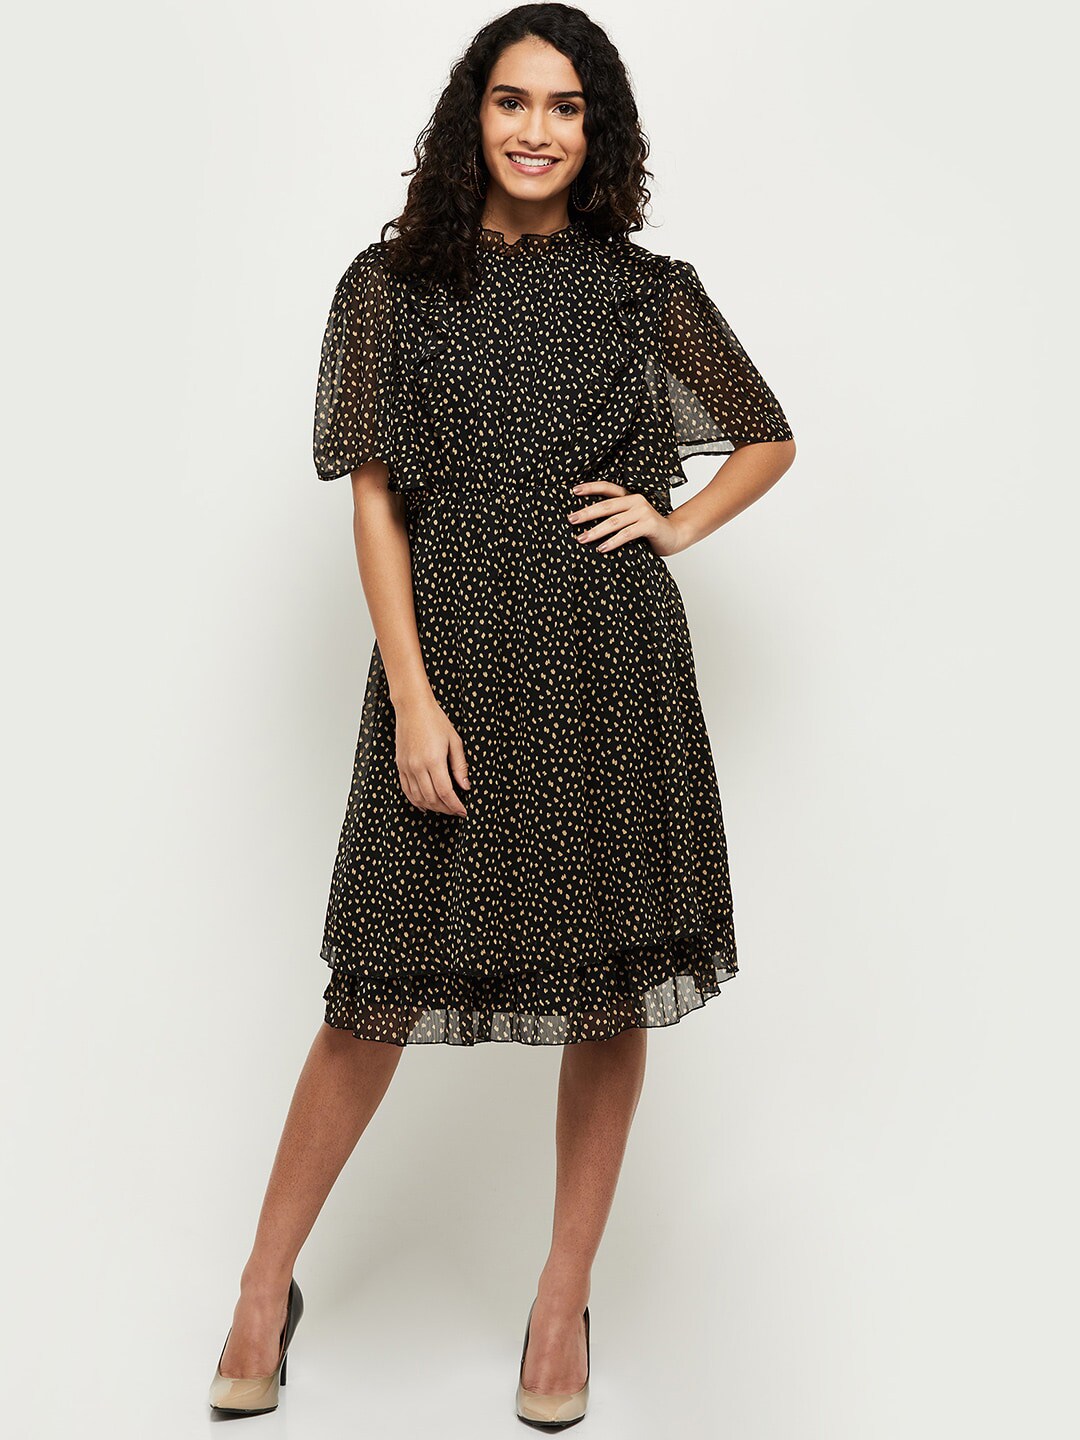 max Women Black Fit and Flare Mock Neck Dress Price in India